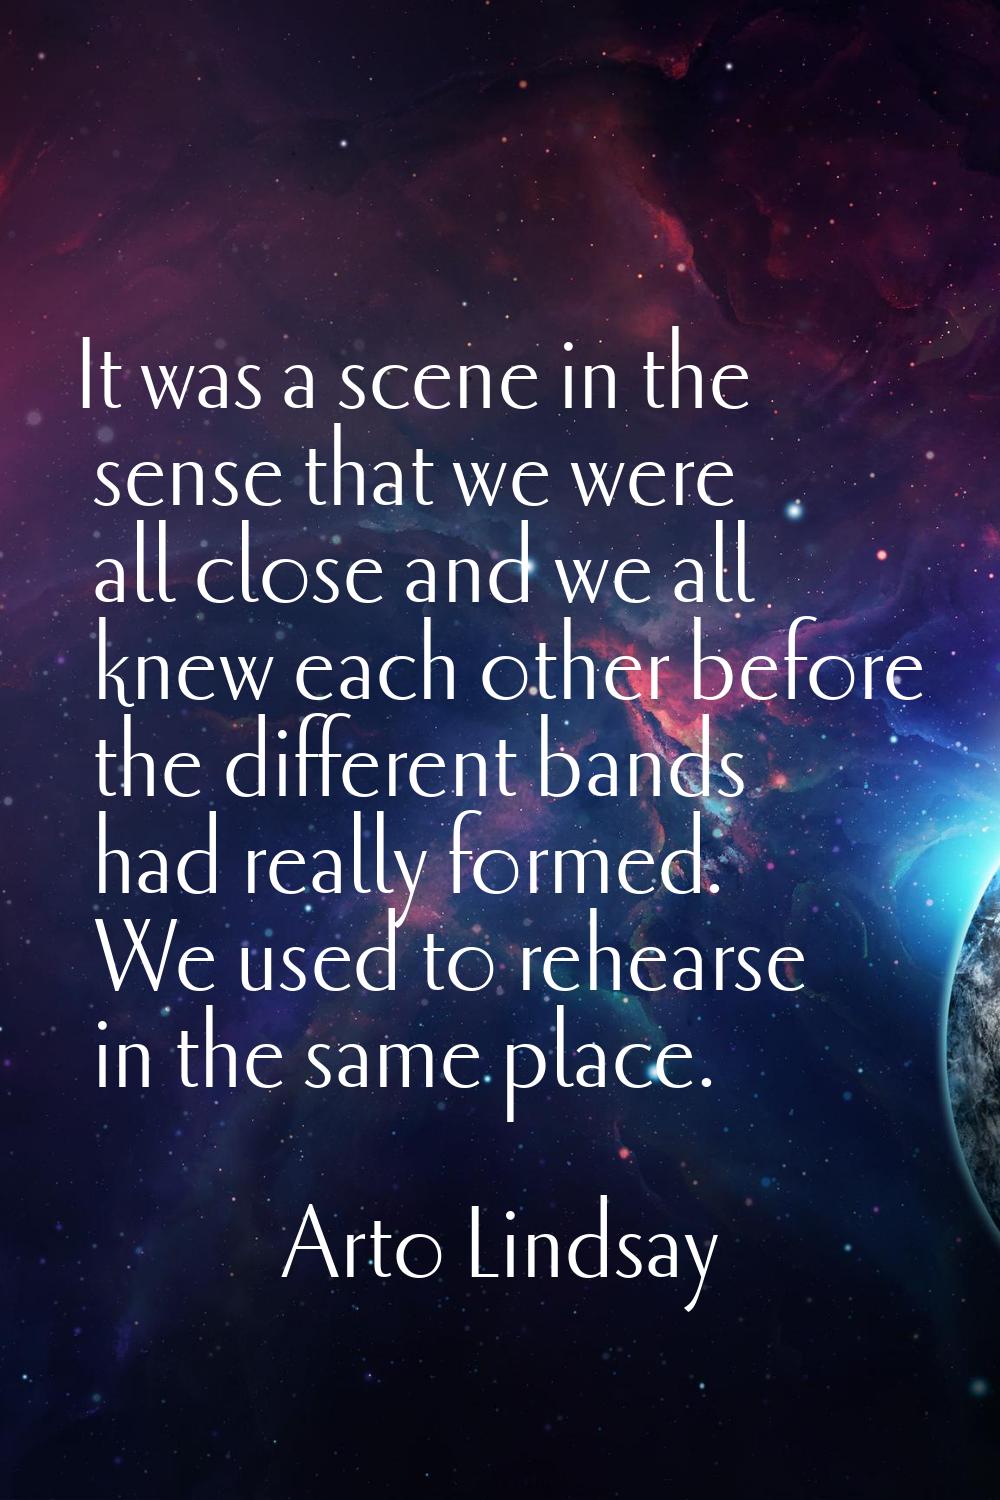 It was a scene in the sense that we were all close and we all knew each other before the different 